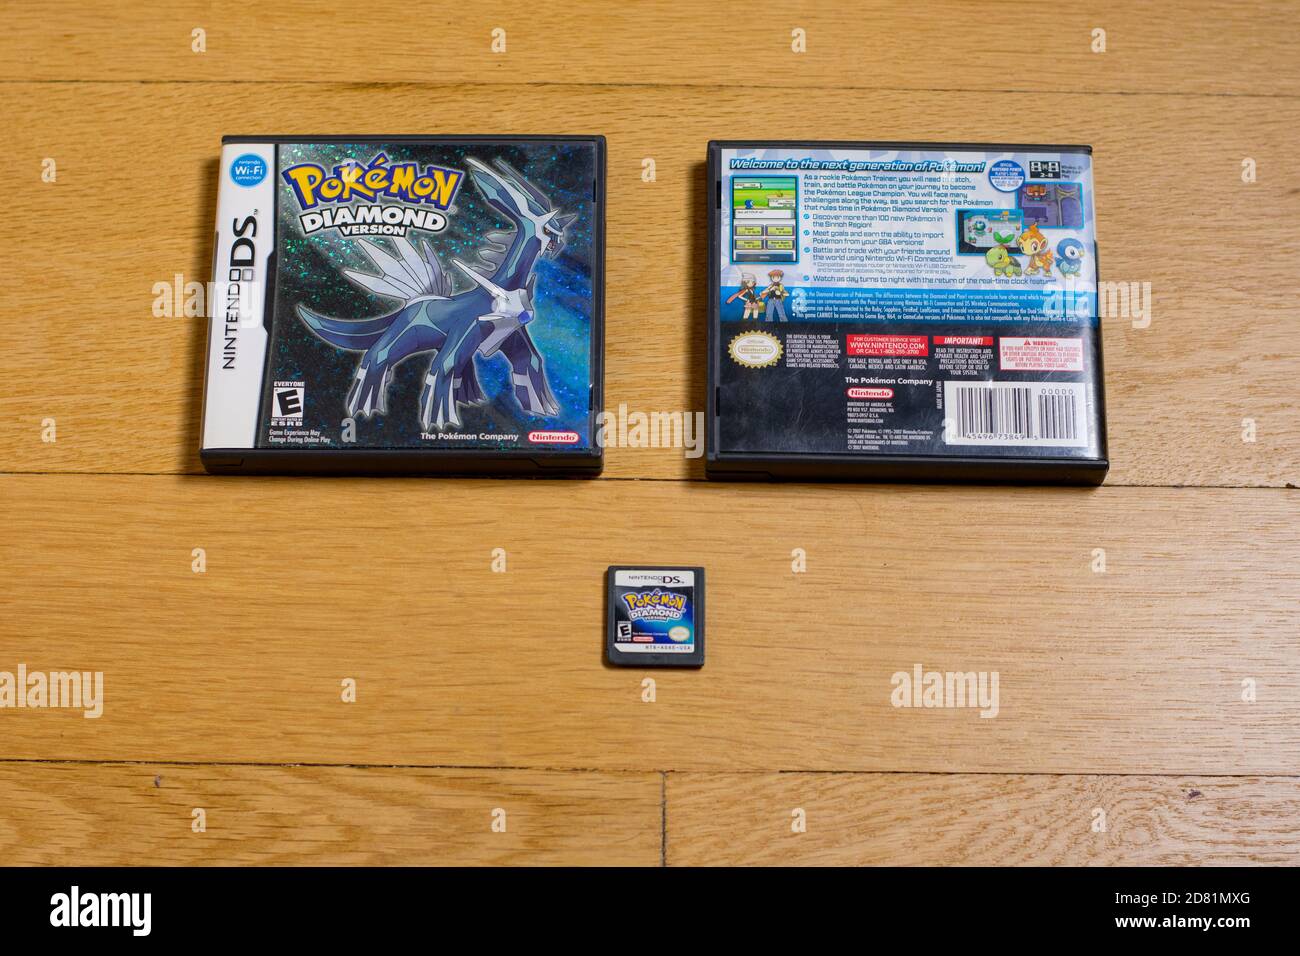 A Pokemon Diamond Cartridge and The Front and Back of It's Game Case for the Nintendo DS on a wood floor. Stock Photo